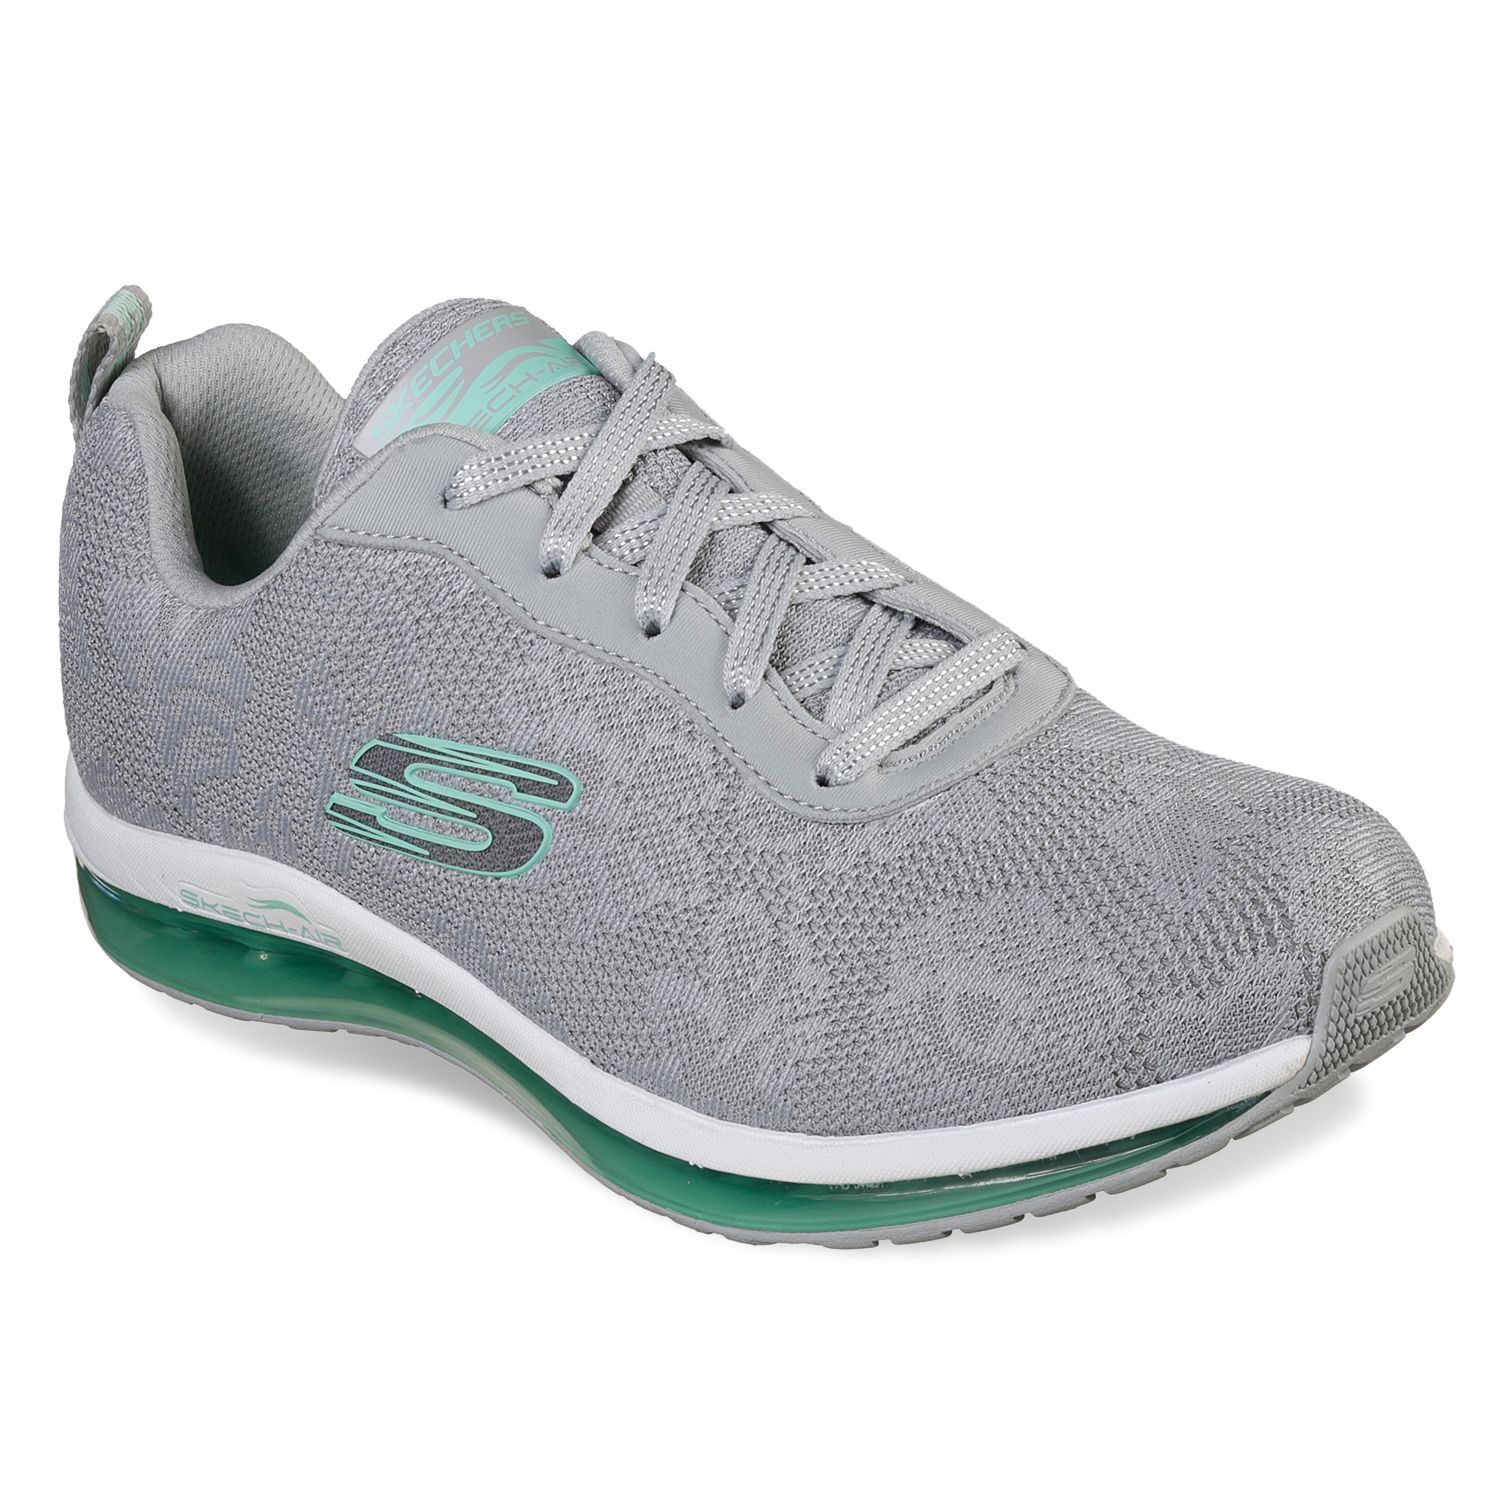 skechers curved shoes